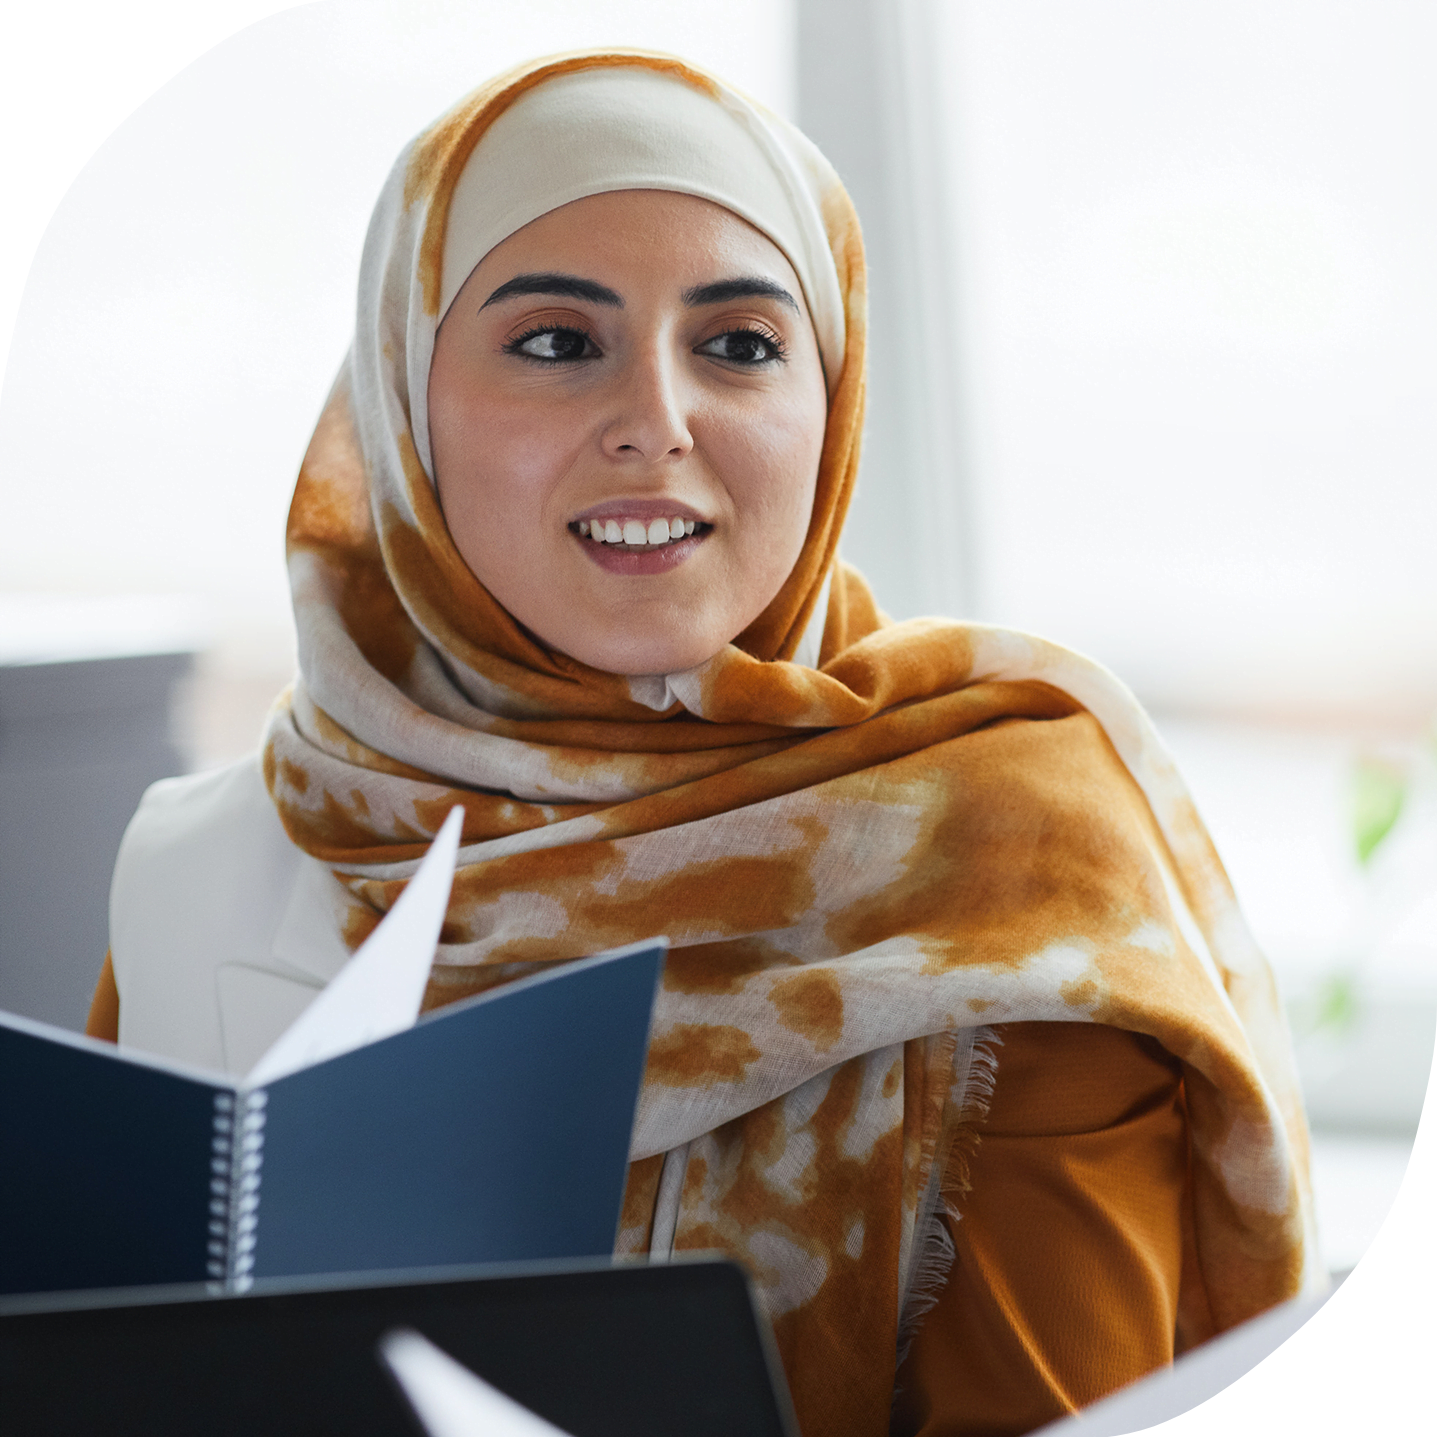 An Arab woman wearing a yellow and white hijab smiling at a colleague who is not pictured. She is flipping through a book and sitting in an office setting.